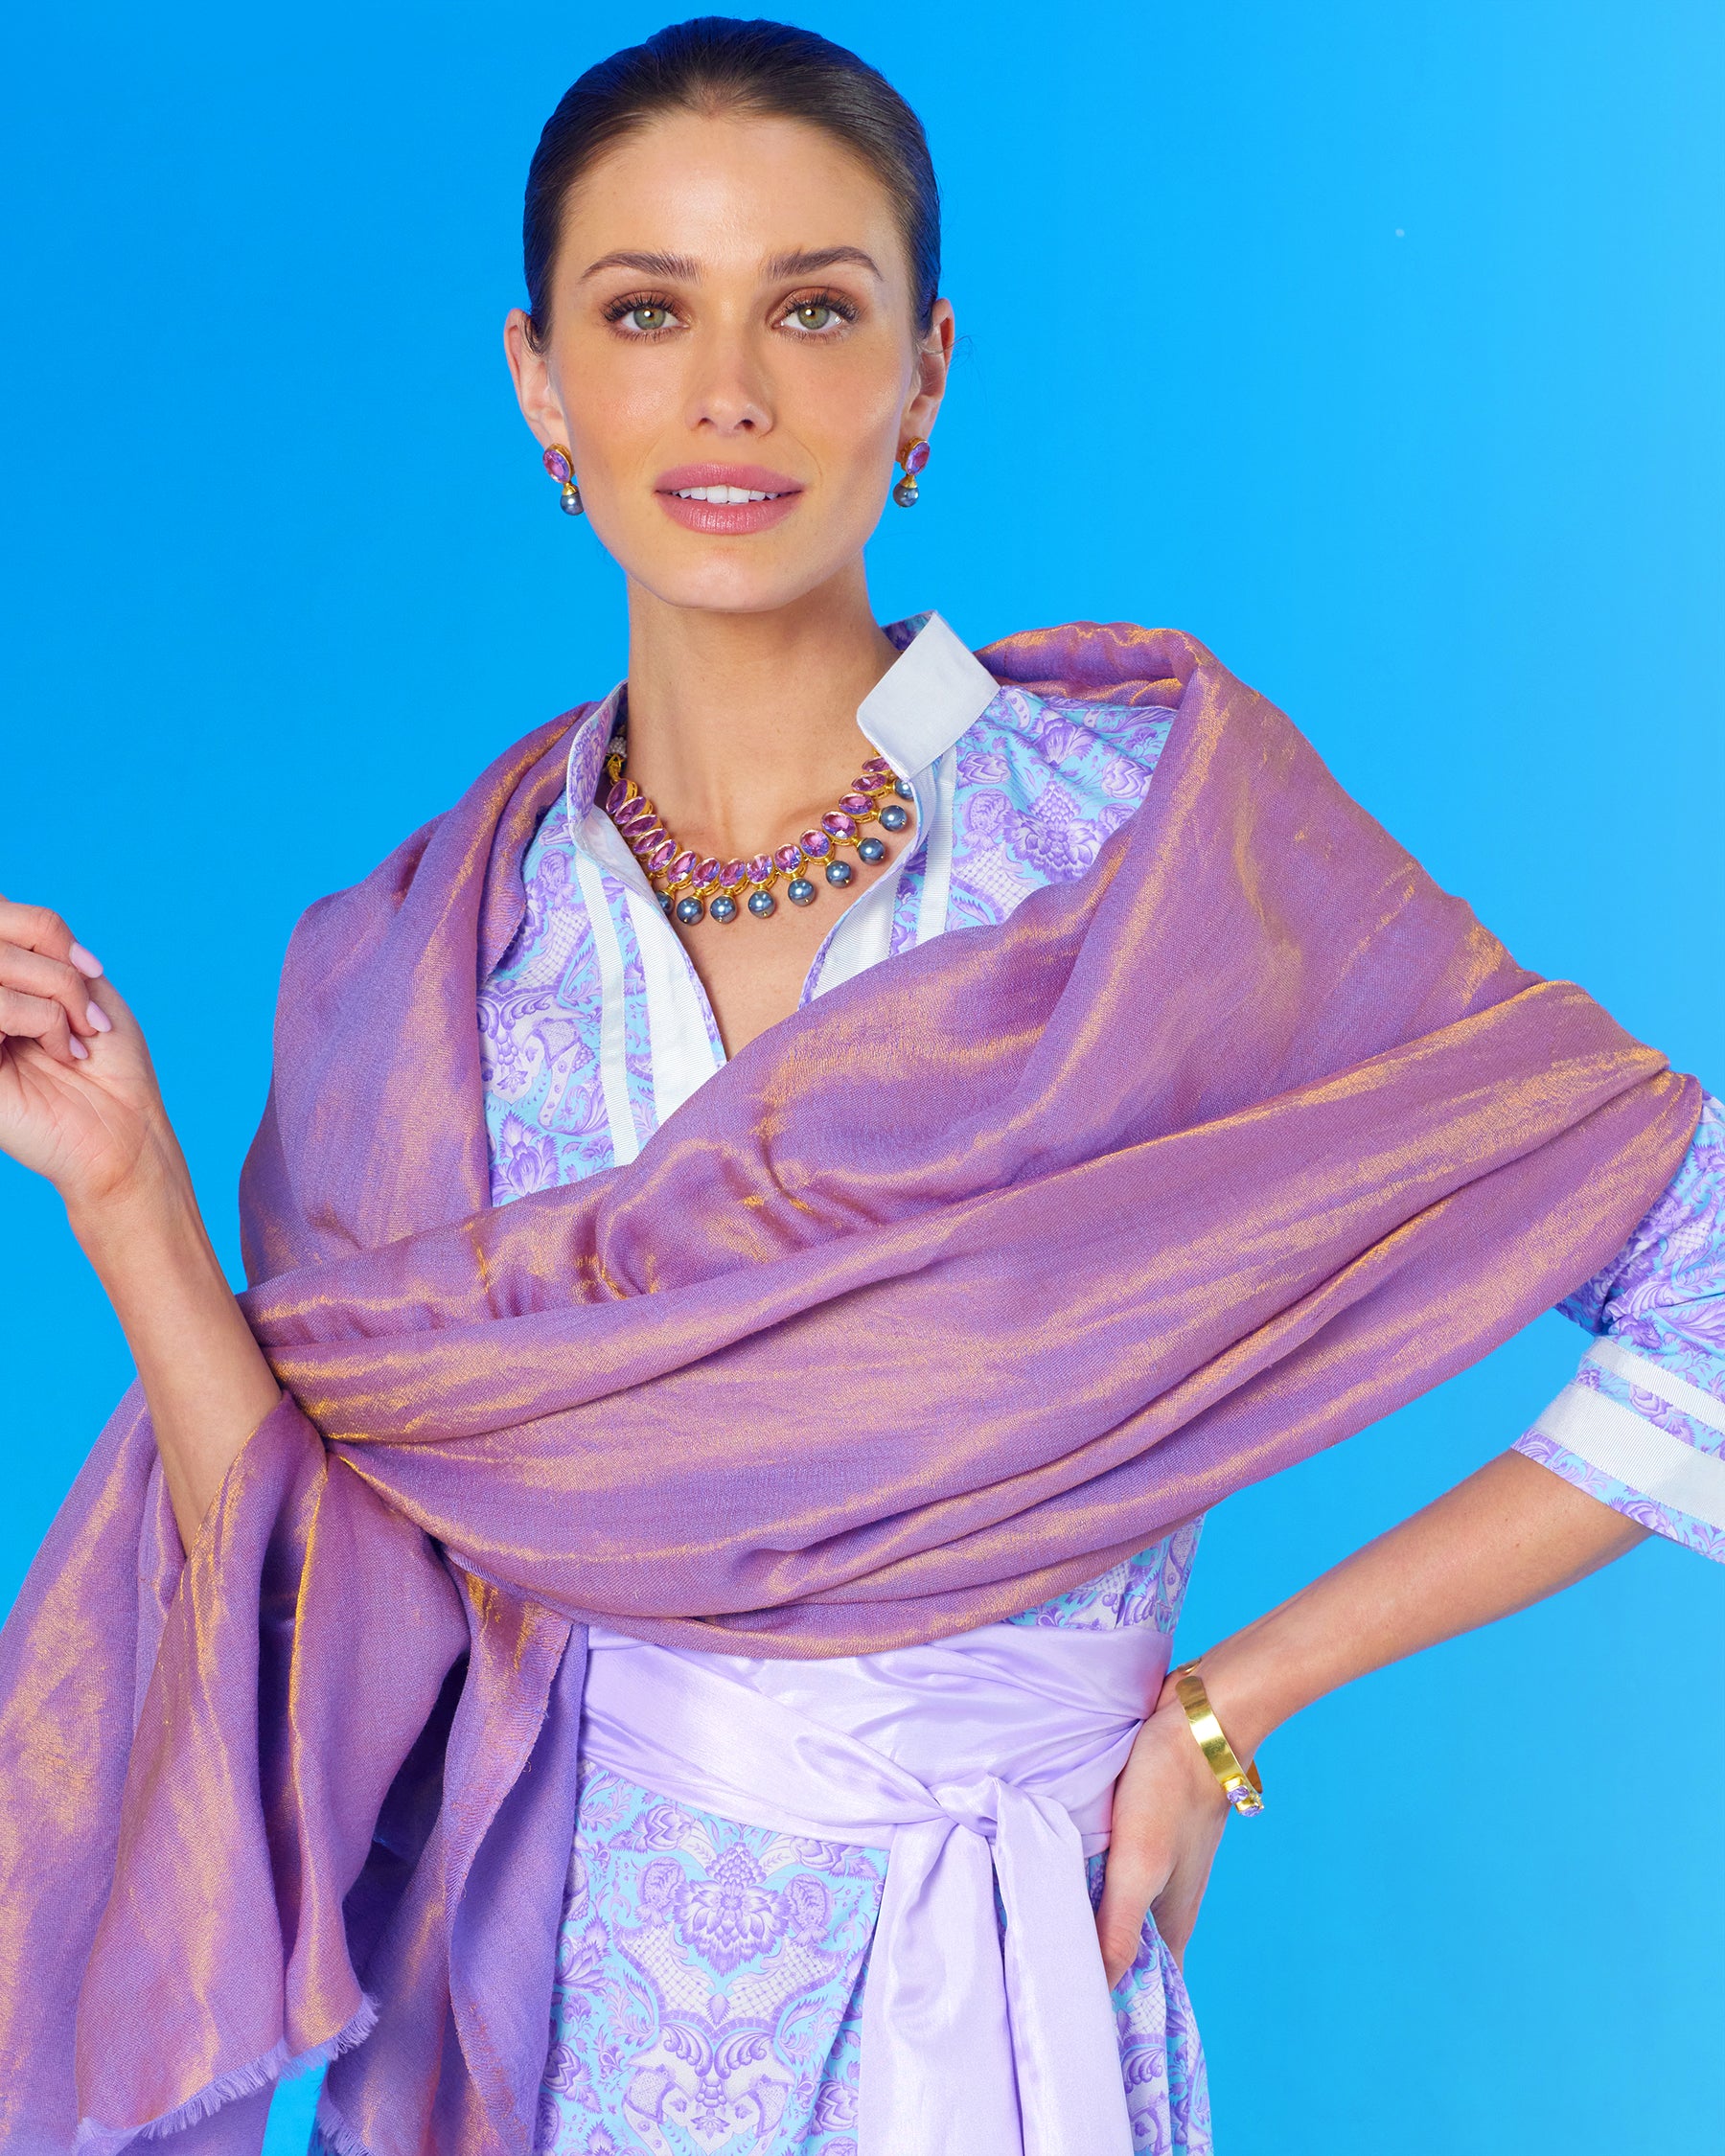 Gia Earrings in Amethyst Lavender worn with the Capri Long Tunic Dress in Lavender Shalimar